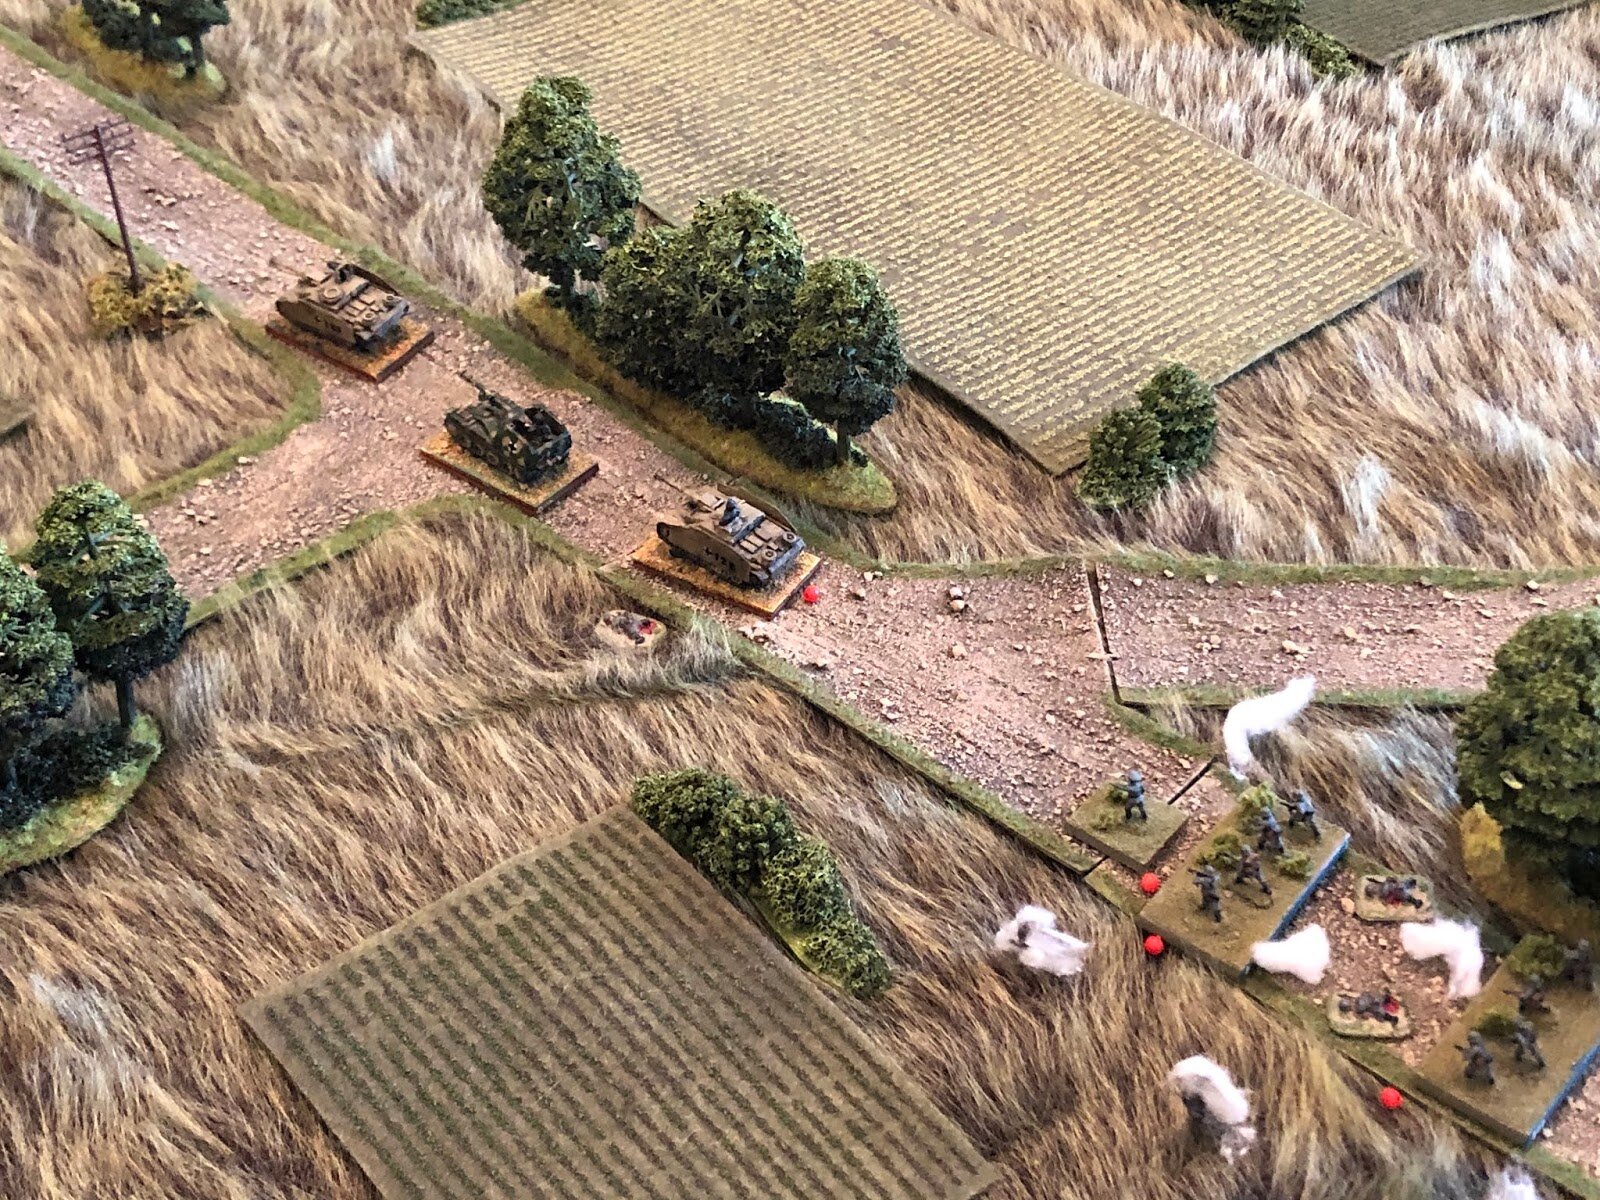 Back on the road, Stug #2 and the Marder are unable to get the platoon commander's vehicle to rally, so they push past the stalled out vehicle (top left).